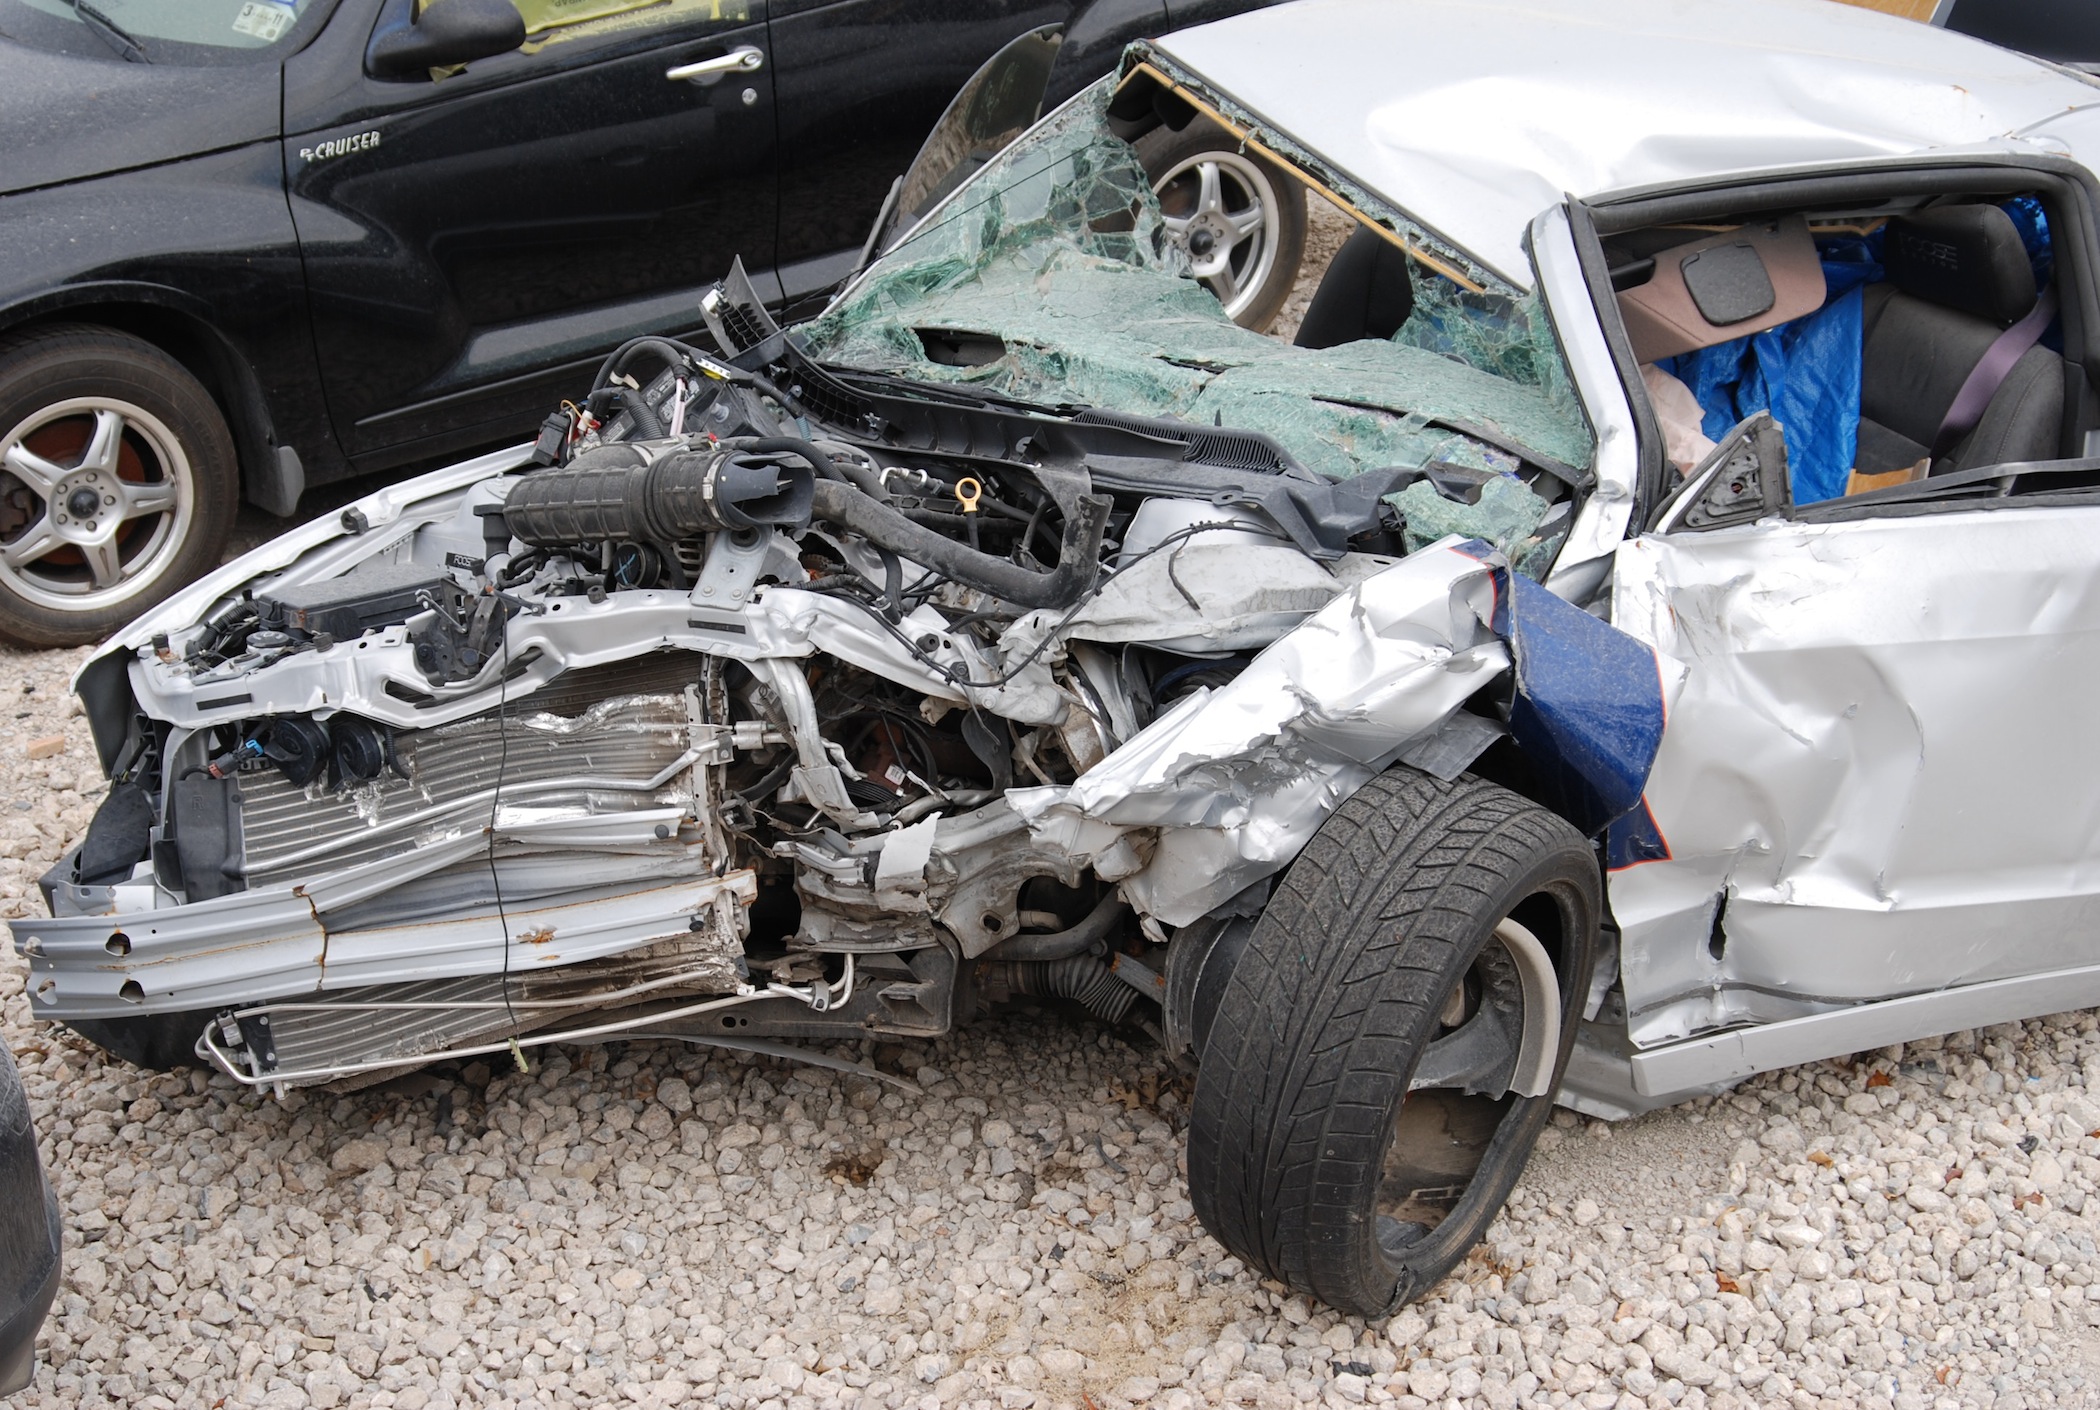 vehicle rescue, head-on collision, extrication, vehicle rescue size-up